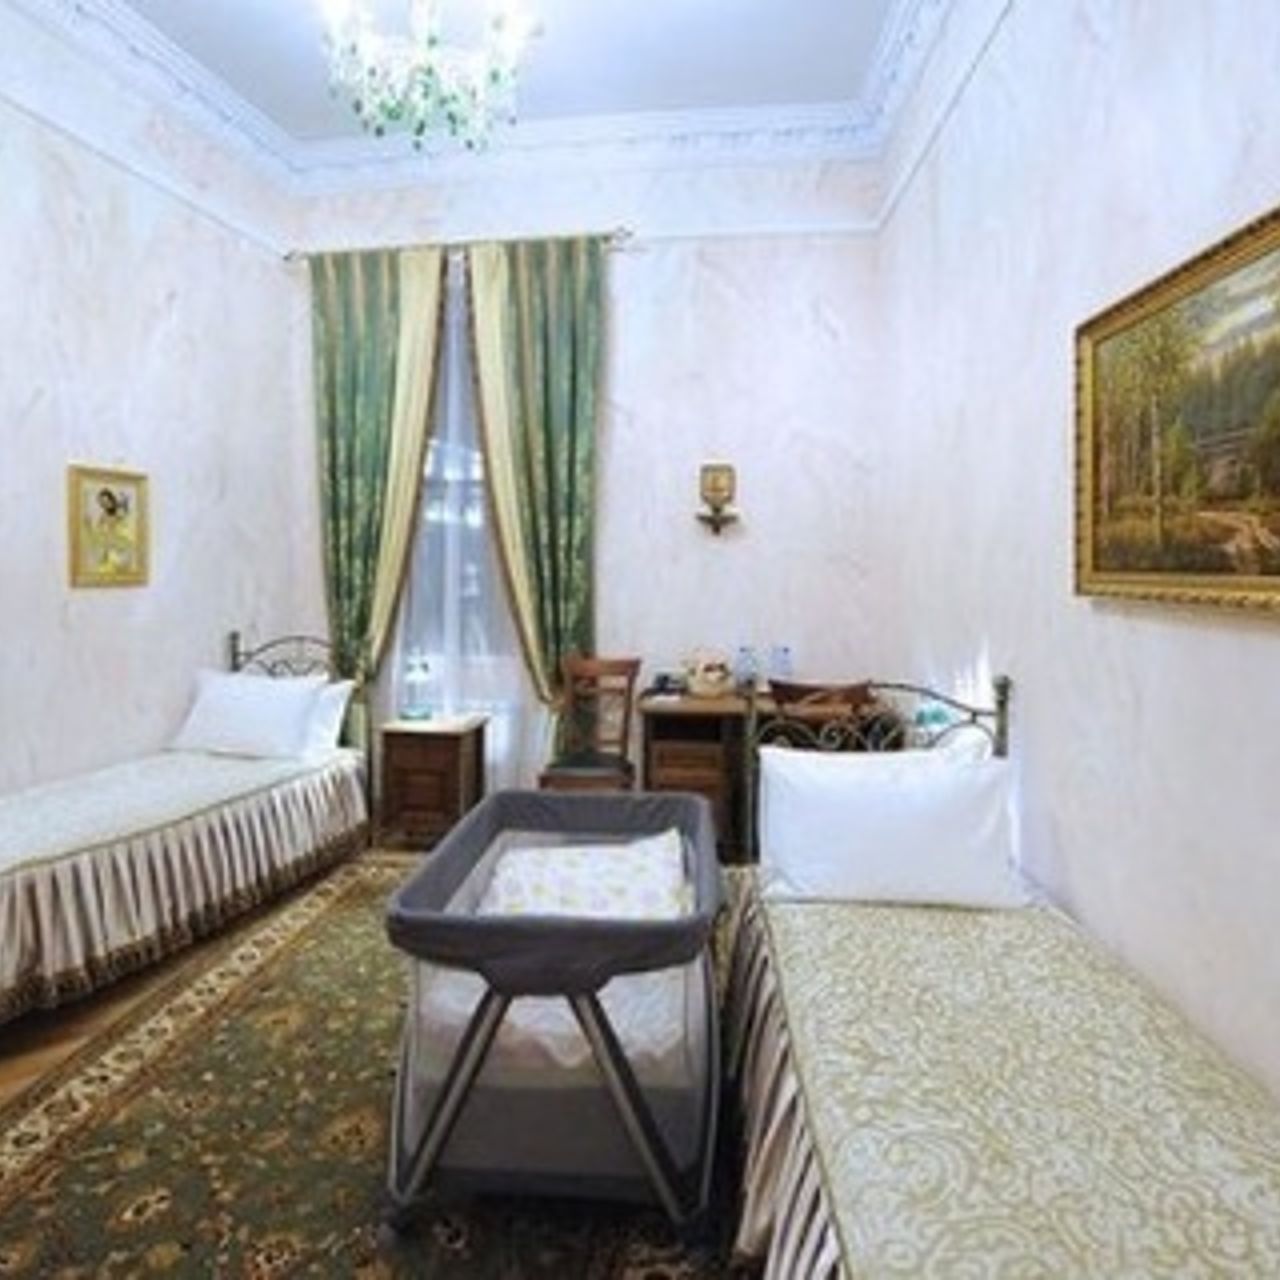 Pokrov Convent Hotel - Moscow - Great prices at HOTEL INFO